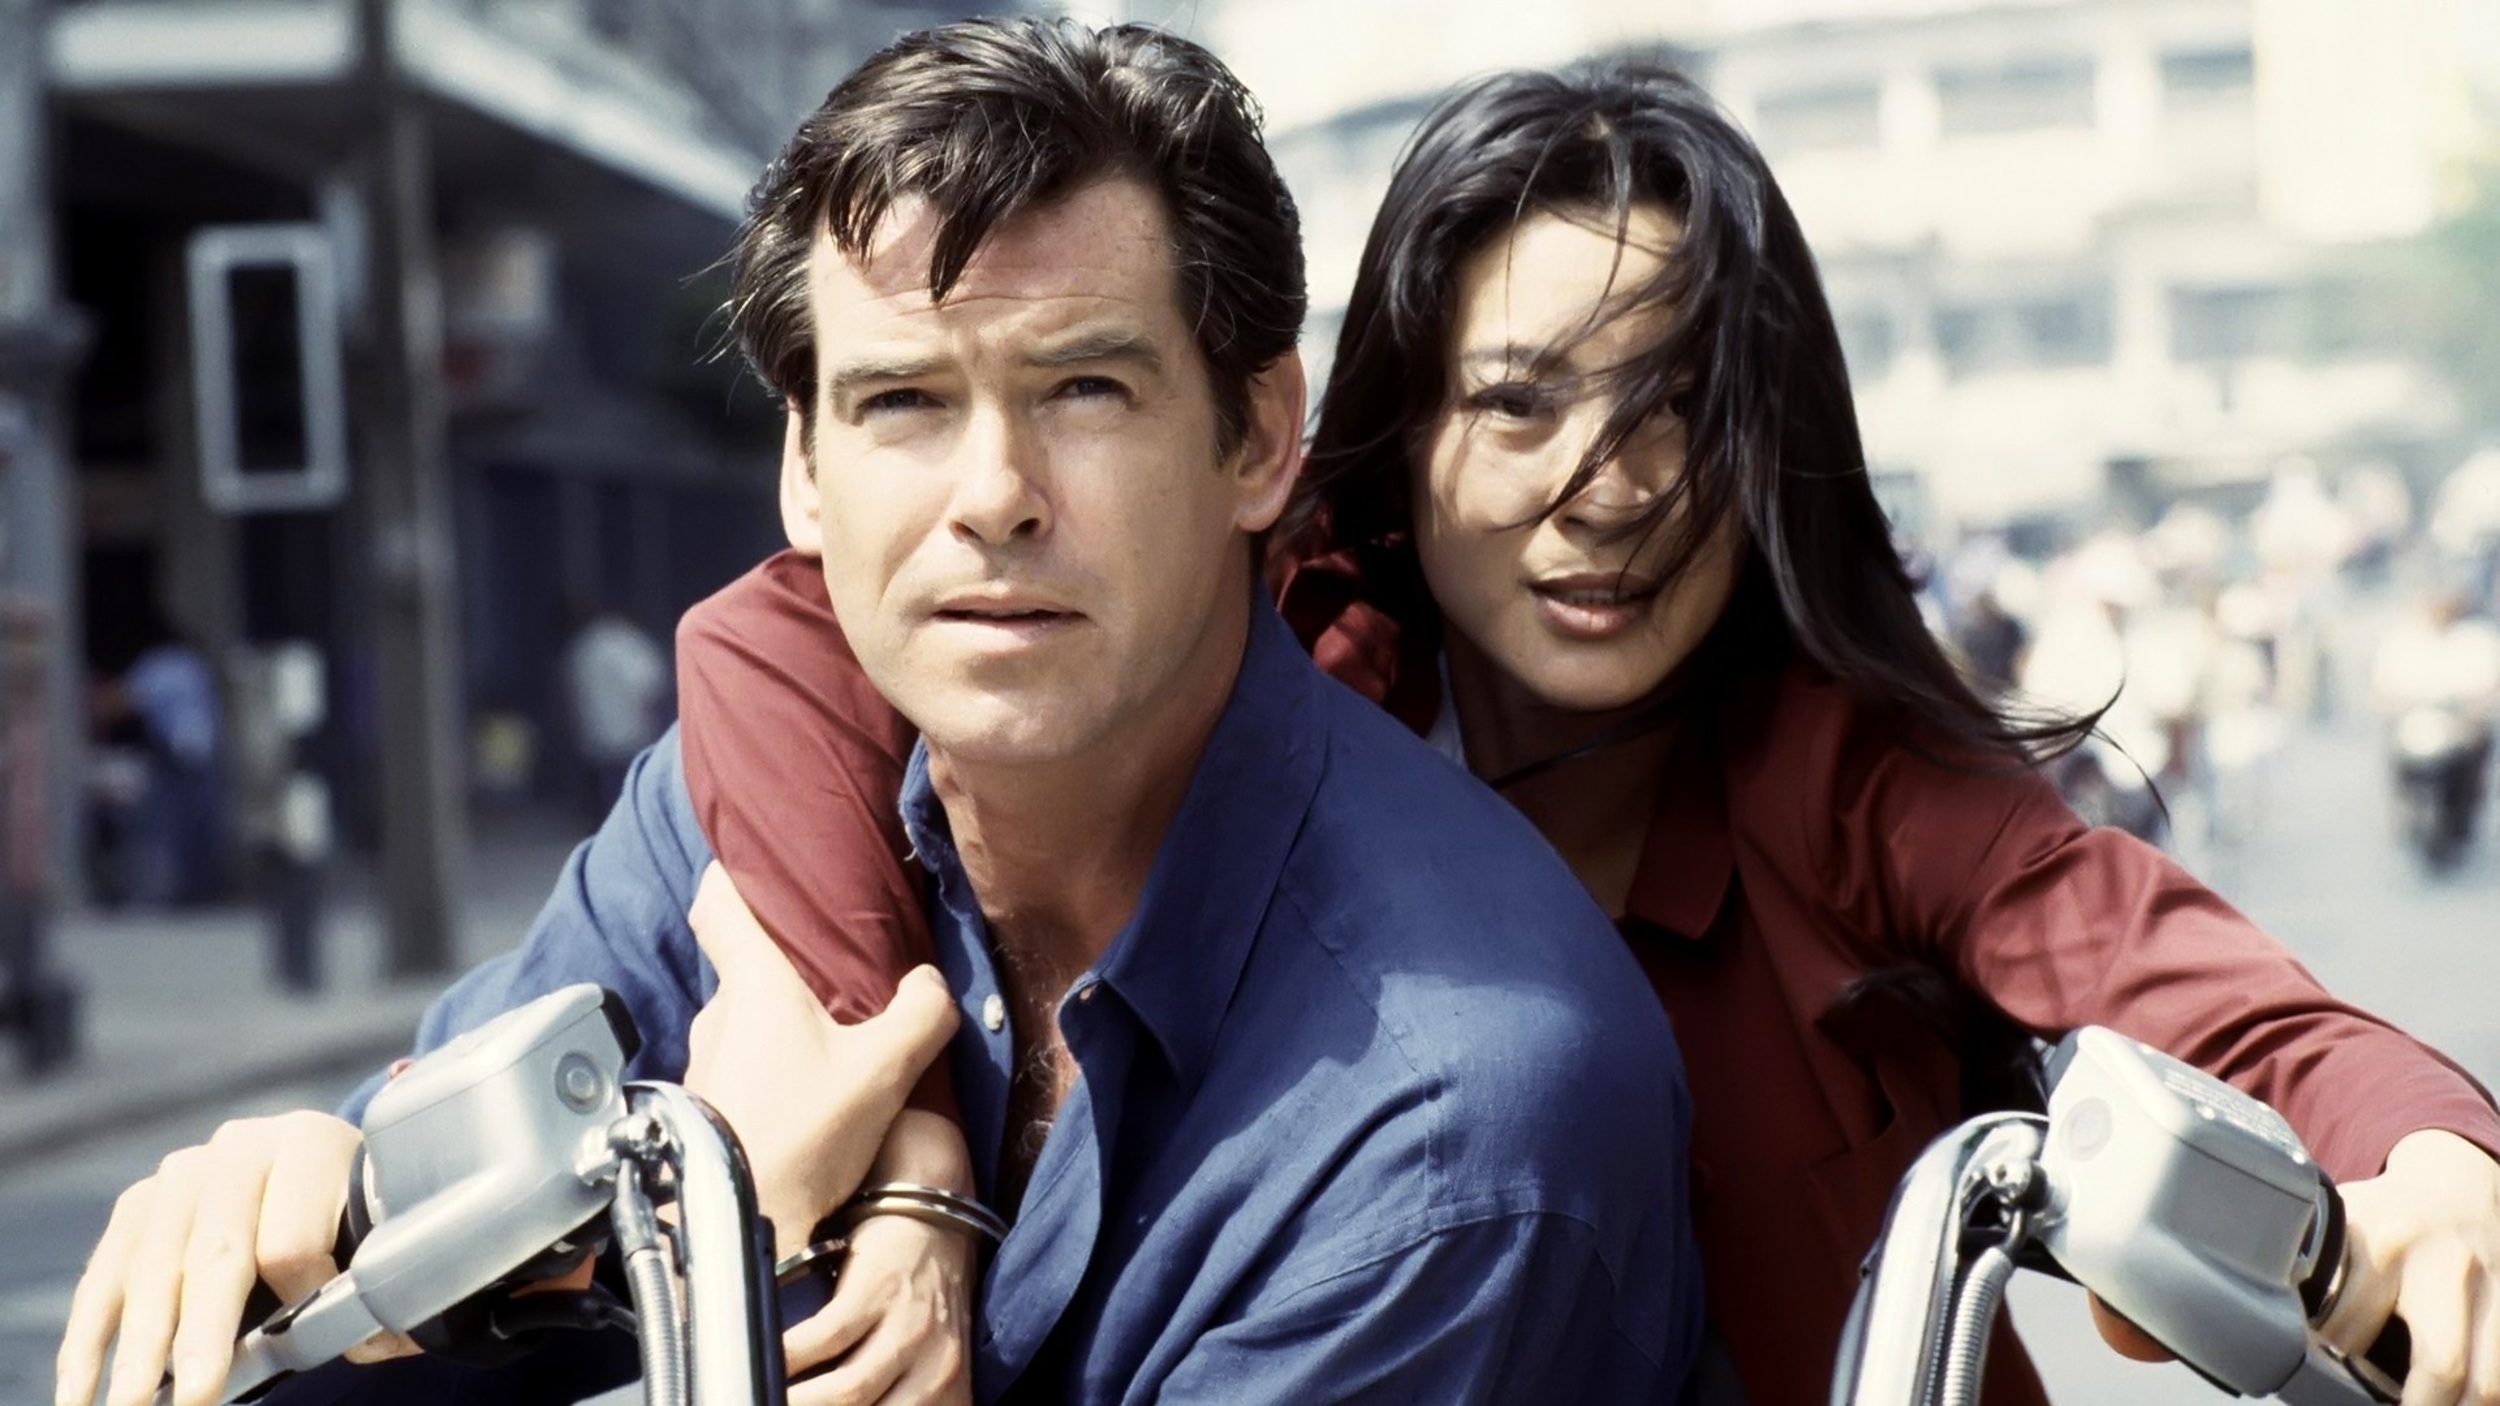 <p>Brosnan’s second Bond installment came within a few million dollars of besting “Titanic” over its opening weekend in December 1997, but, alas, it fell significantly short of its overall worldwide gross. This Roger Spottiswoode-directed film features a crackerjack set piece wherein Bond remotely drives a car from its back seat, and it pairs him with the great Michelle Yeoh, whose martial arts expertise nearly landed her a spinoff franchise. Yeoh is the show. Jonathan Pryce plays a world-domination-obsessed baddie inspired by Rupert Murdoch, which is splendid in theory and limp in execution.</p><p>You may also like: <a href='https://www.yardbarker.com/entertainment/articles/20_tv_characters_who_were_recast_010724/s1__39326582'>20 TV characters who were recast</a></p>